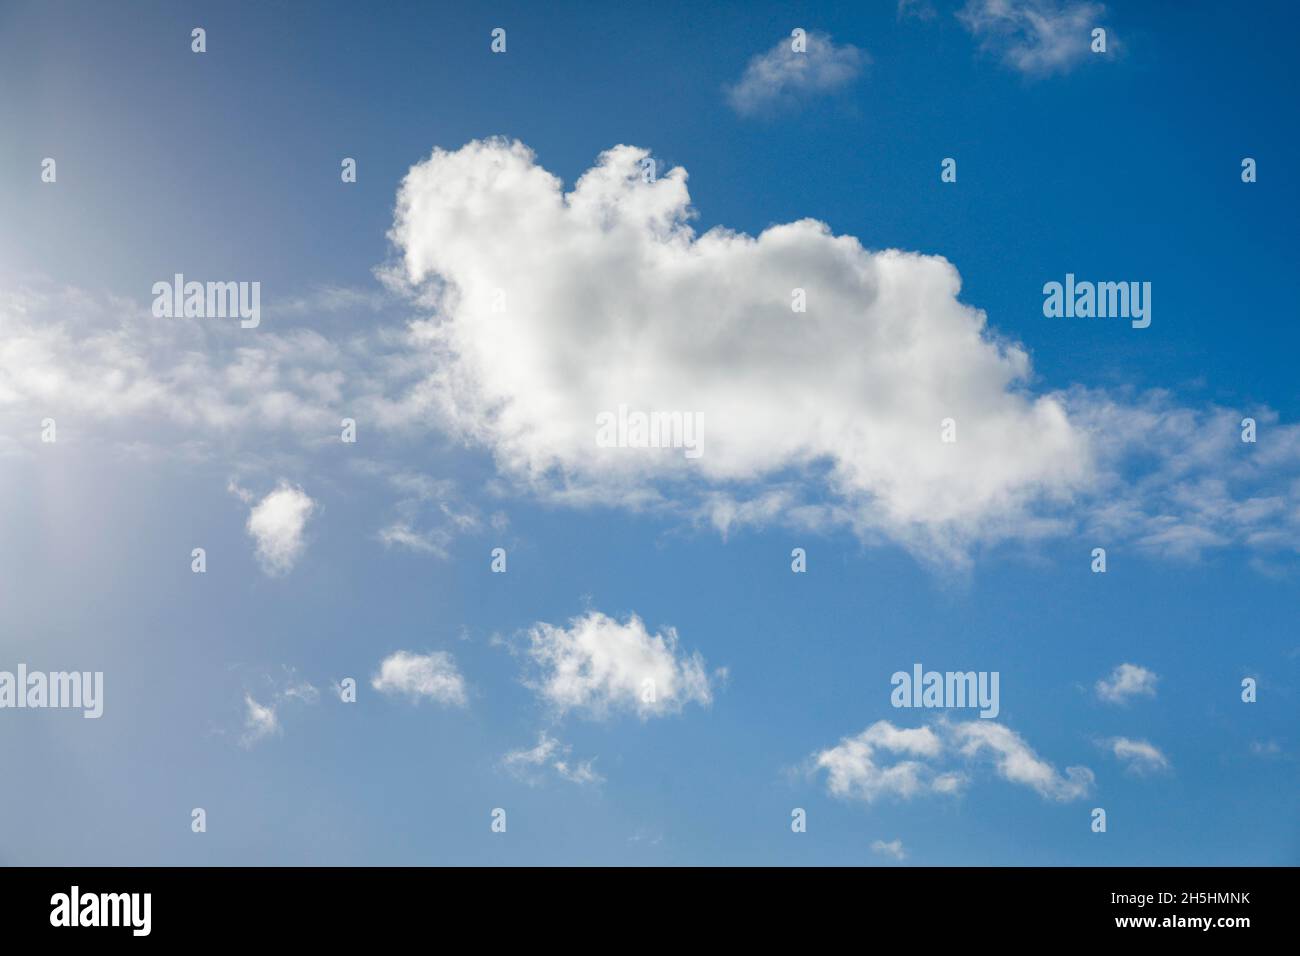 A single fleecy cloud, along with a few feathery clouds, adorns the blue sky in strong winds Stock Photo